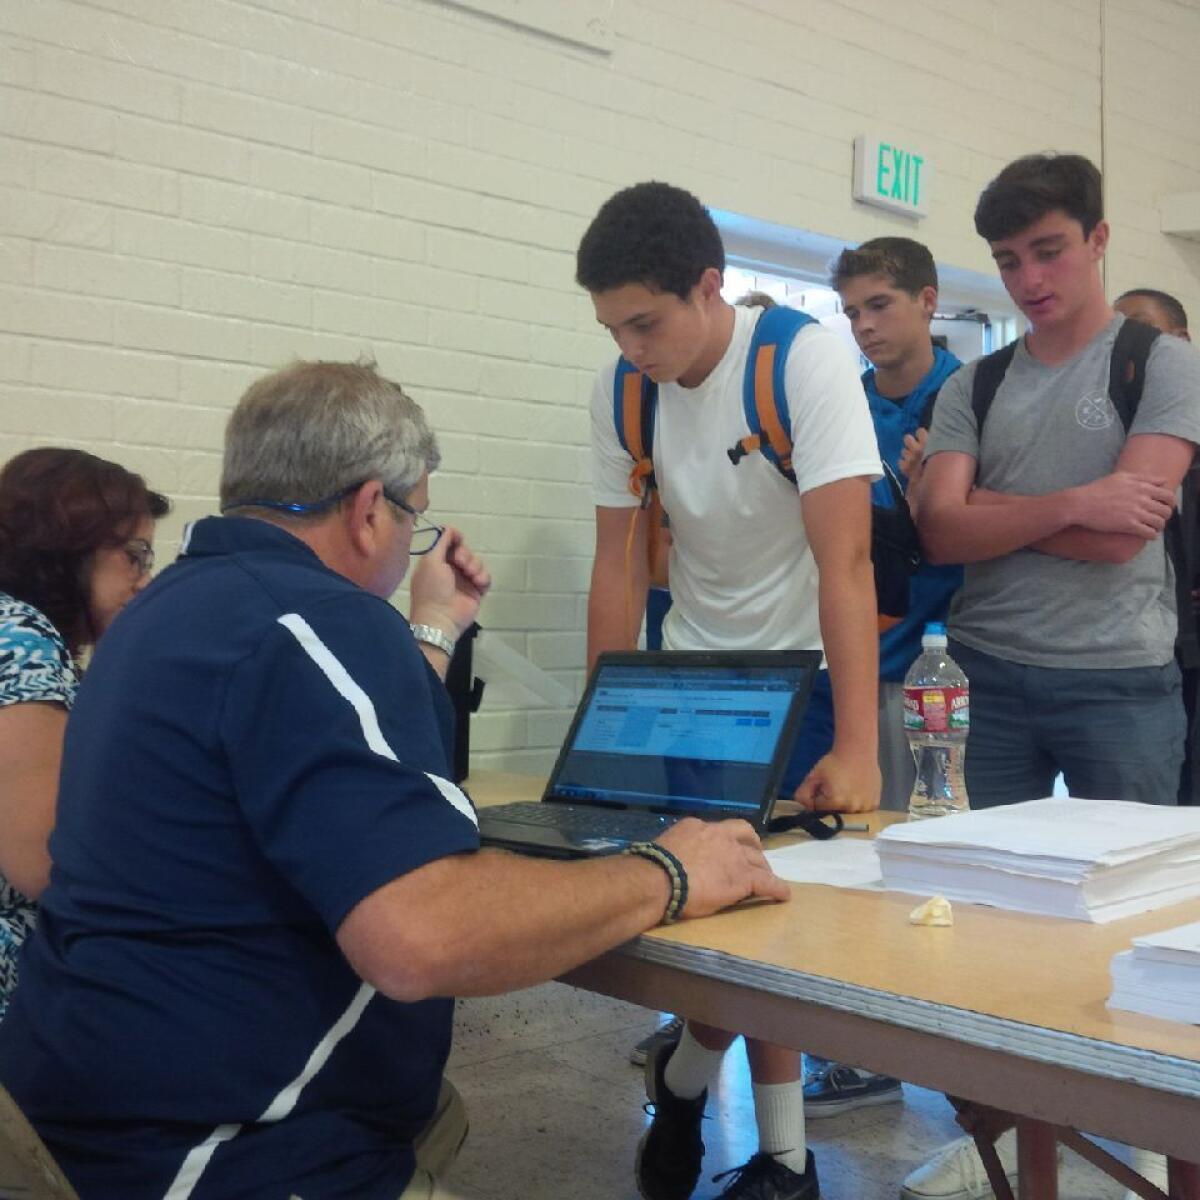 Loyola athletic trainer Tim Moscicki registers students for baseline concussion tests.